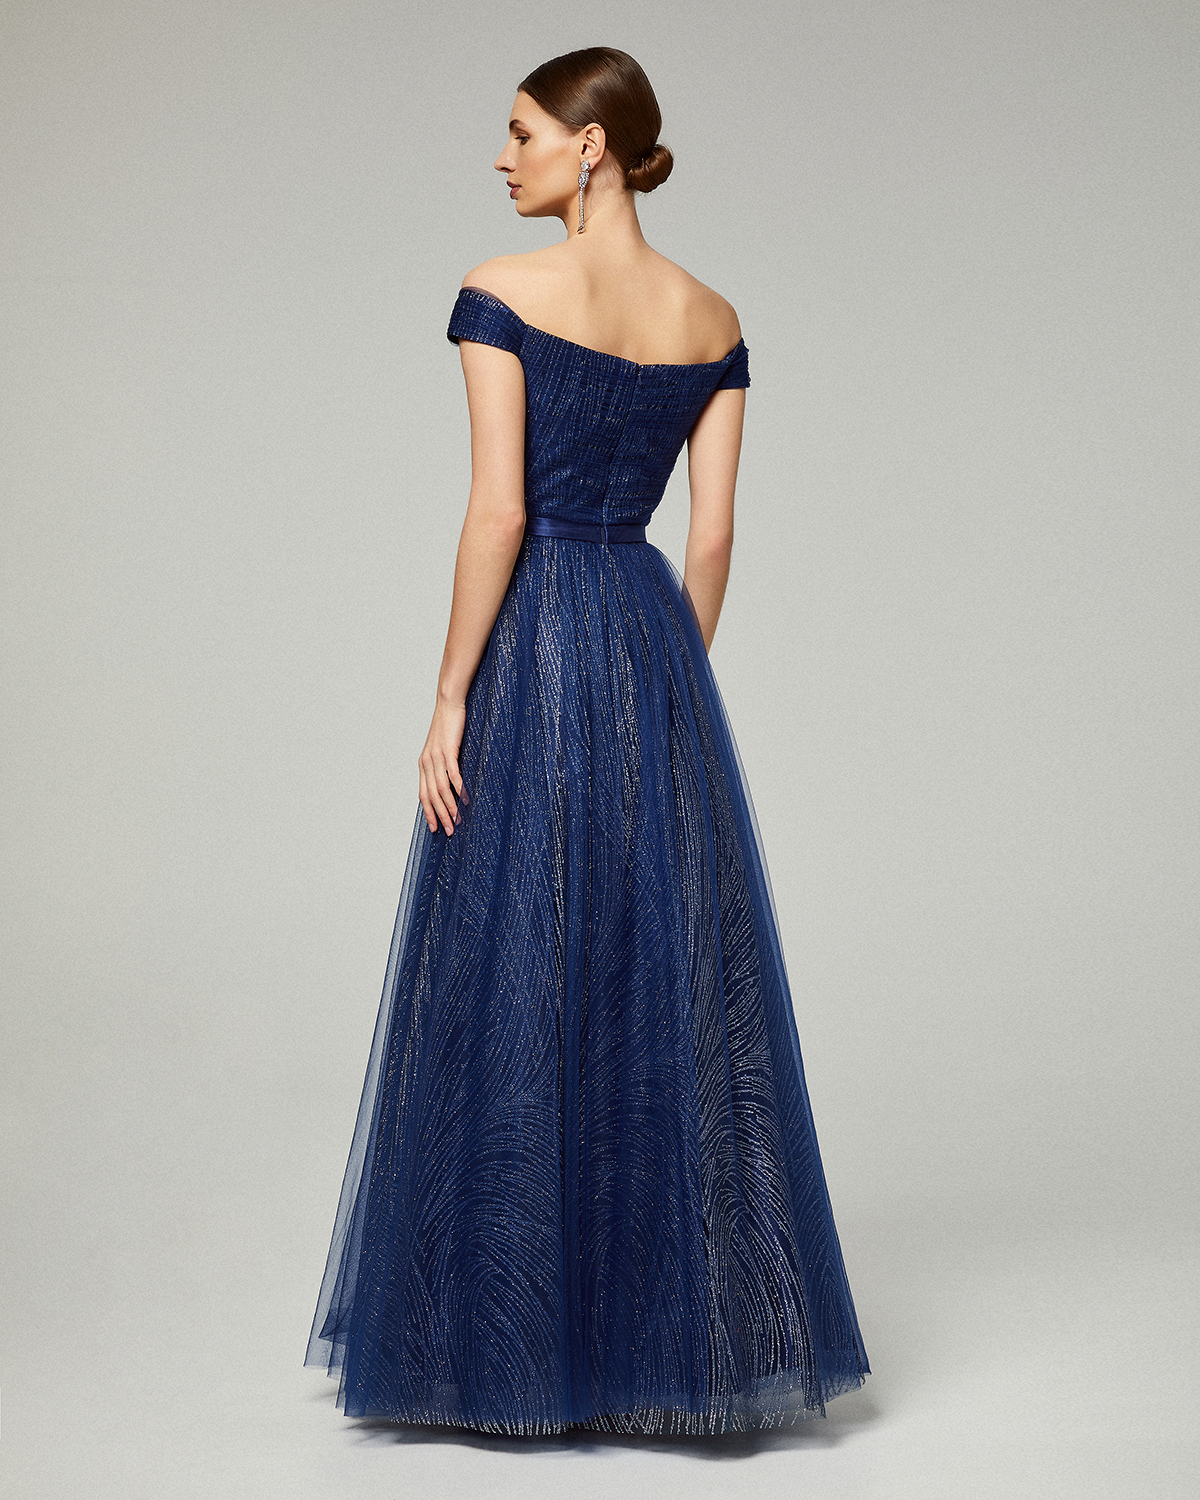 Long evening dress with shining tulle fabric